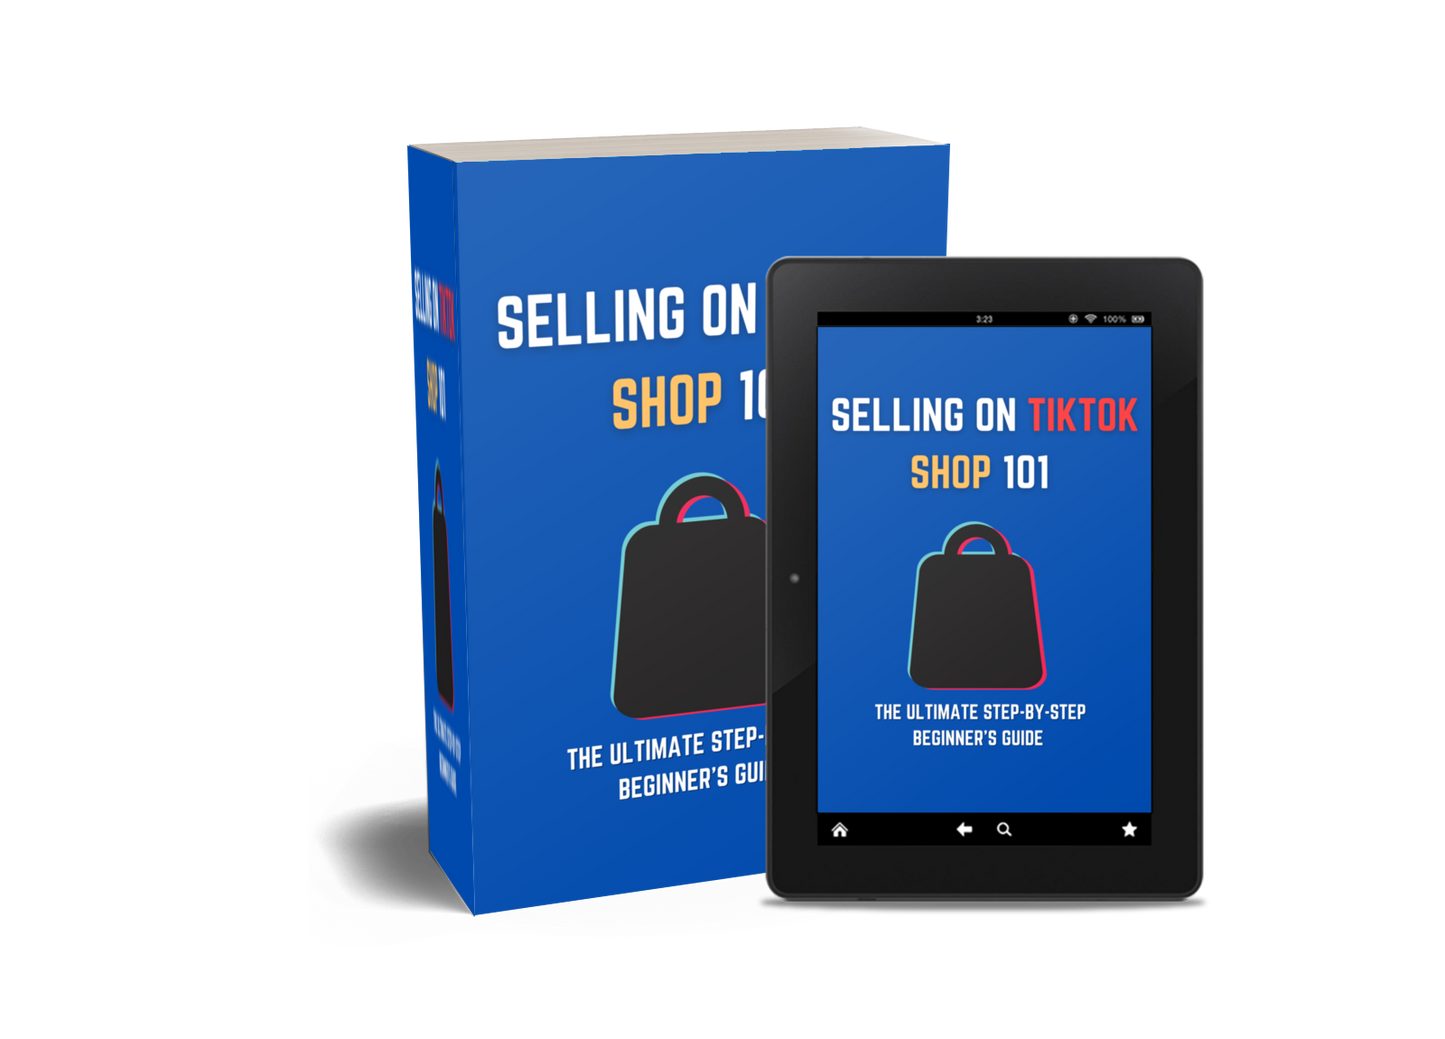 🚀 Master the Art of Selling on TikTok Shop with "Selling on TikTok Shop 101🚀